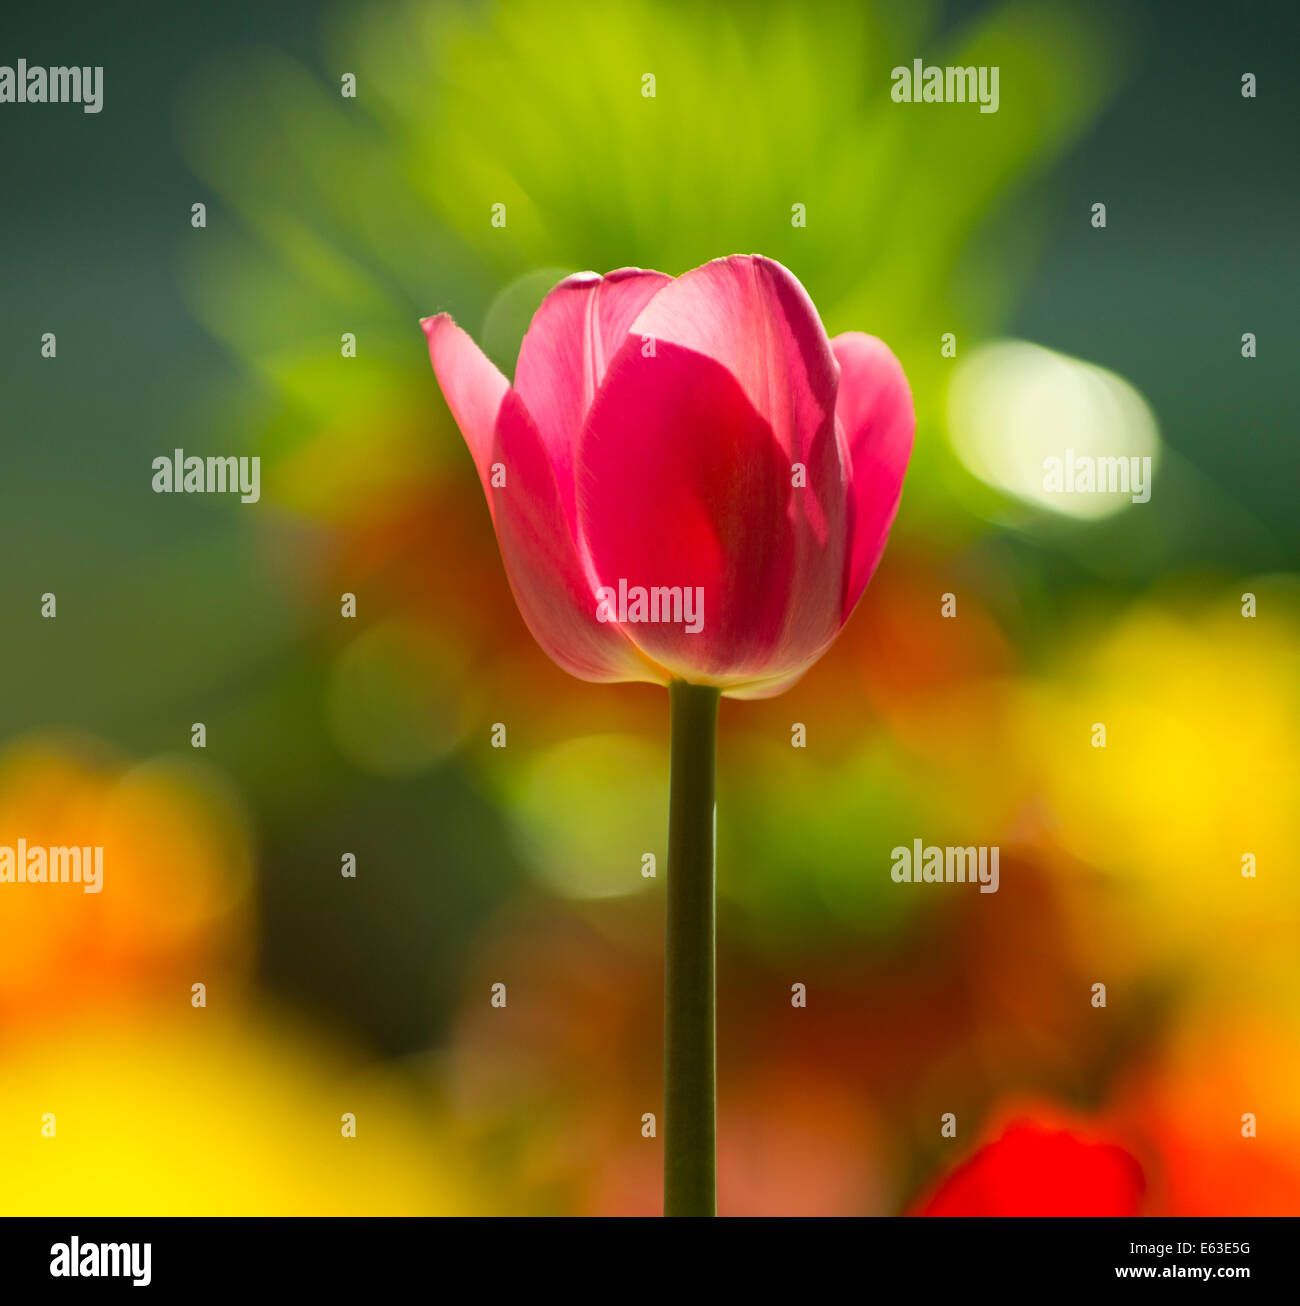 Flowers, Close-up of backlit Red Tulip with a blurred floral background. USA Stock Photo